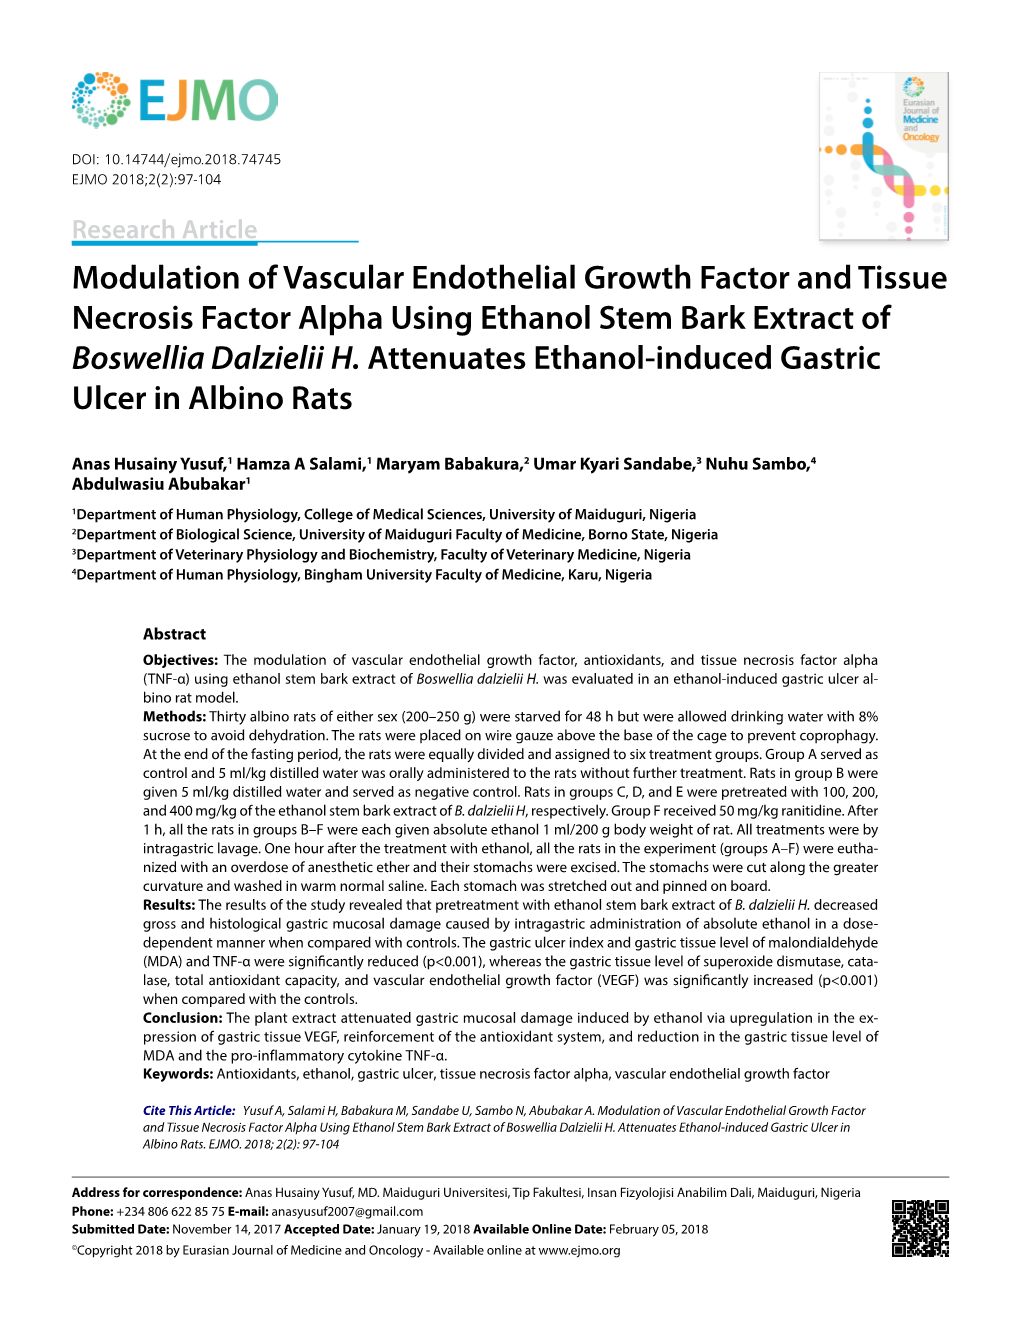 Modulation of Vascular Endothelial Growth Factor and Tissue Necrosis Factor Alpha Using Ethanol Stem Bark Extract of Boswellia Dalzielii H